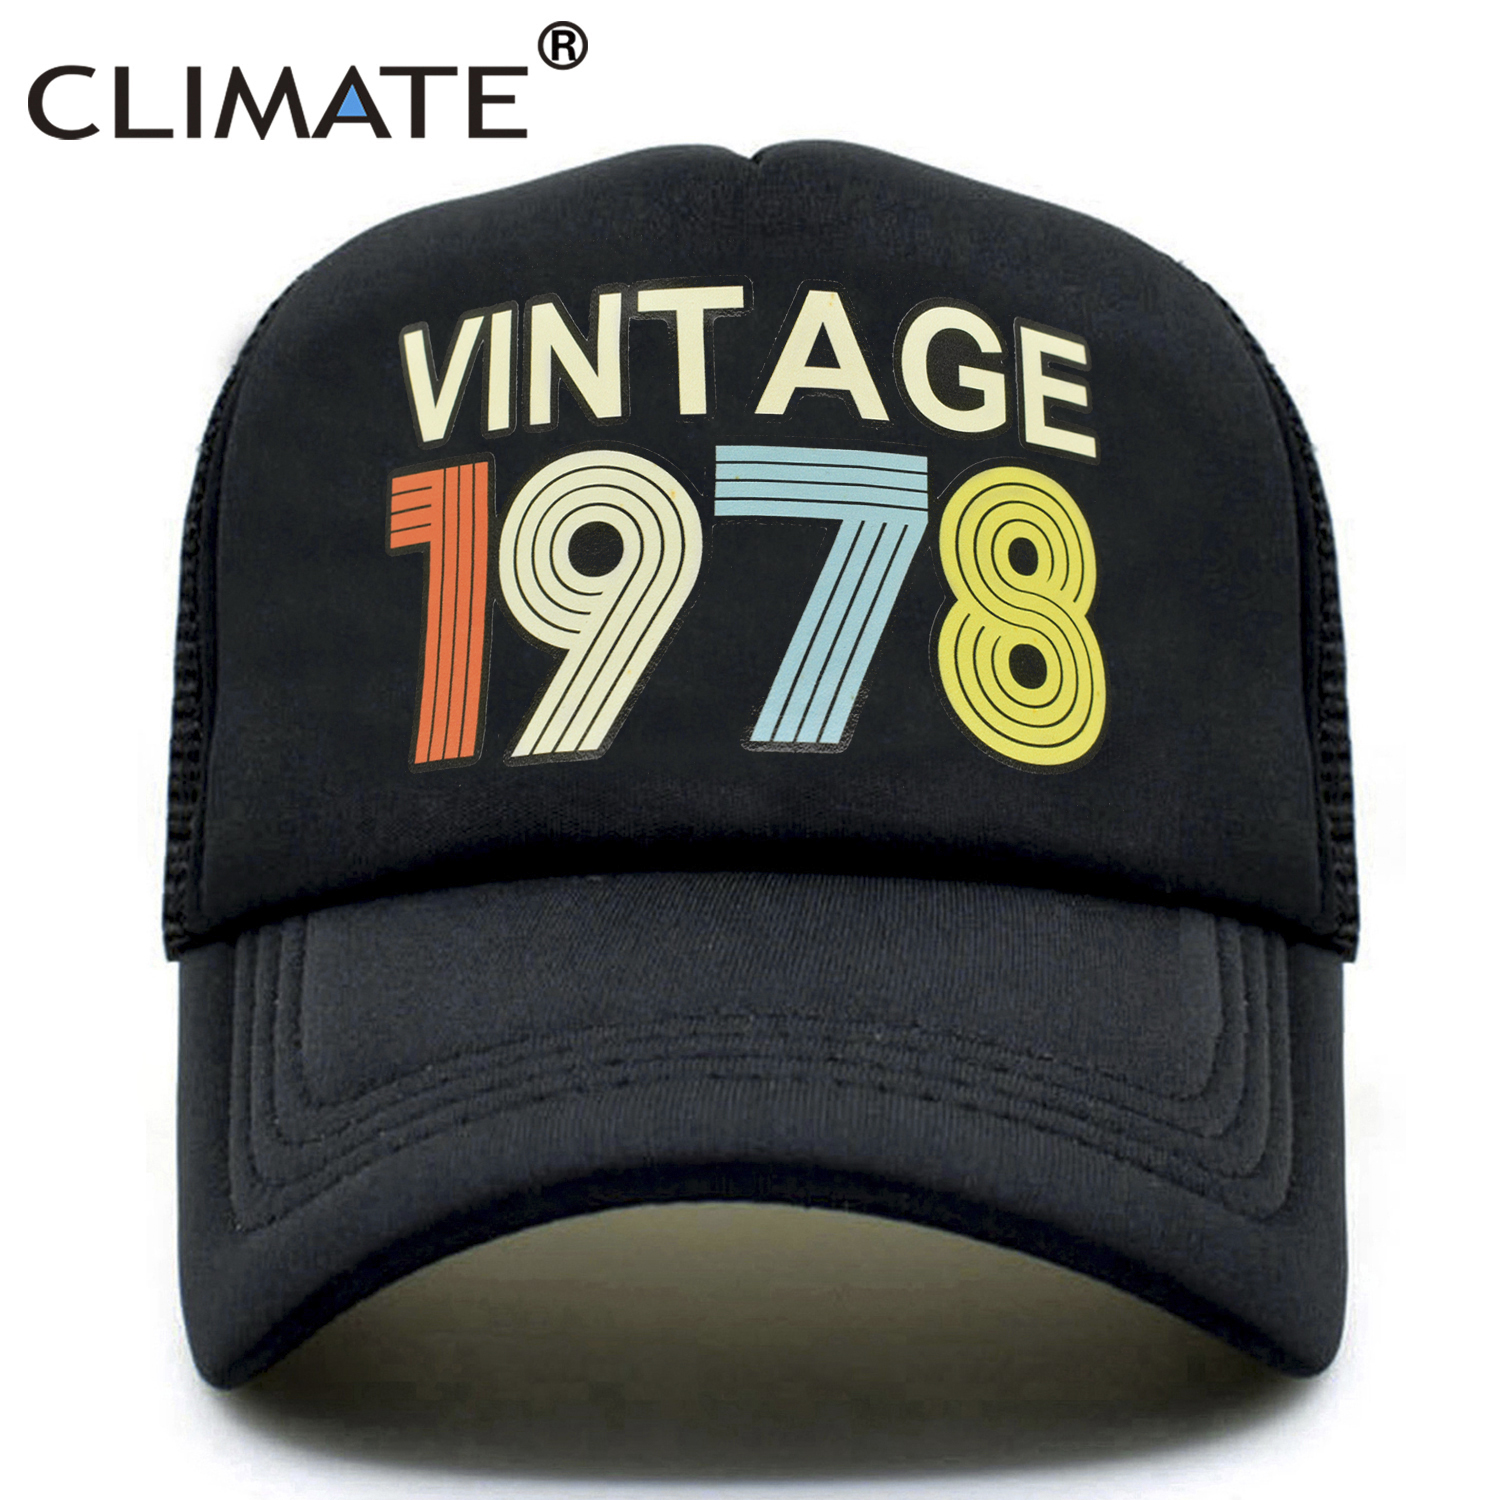 Climate Vintage 1978 Cap 1978 Vintage Trucker Cap Men Retro 40th Birthday Gift Baseball Caps Black Cool Trucker Caps Hat For Men Price History Review Aliexpress Seller New Climate Store Alitools Io